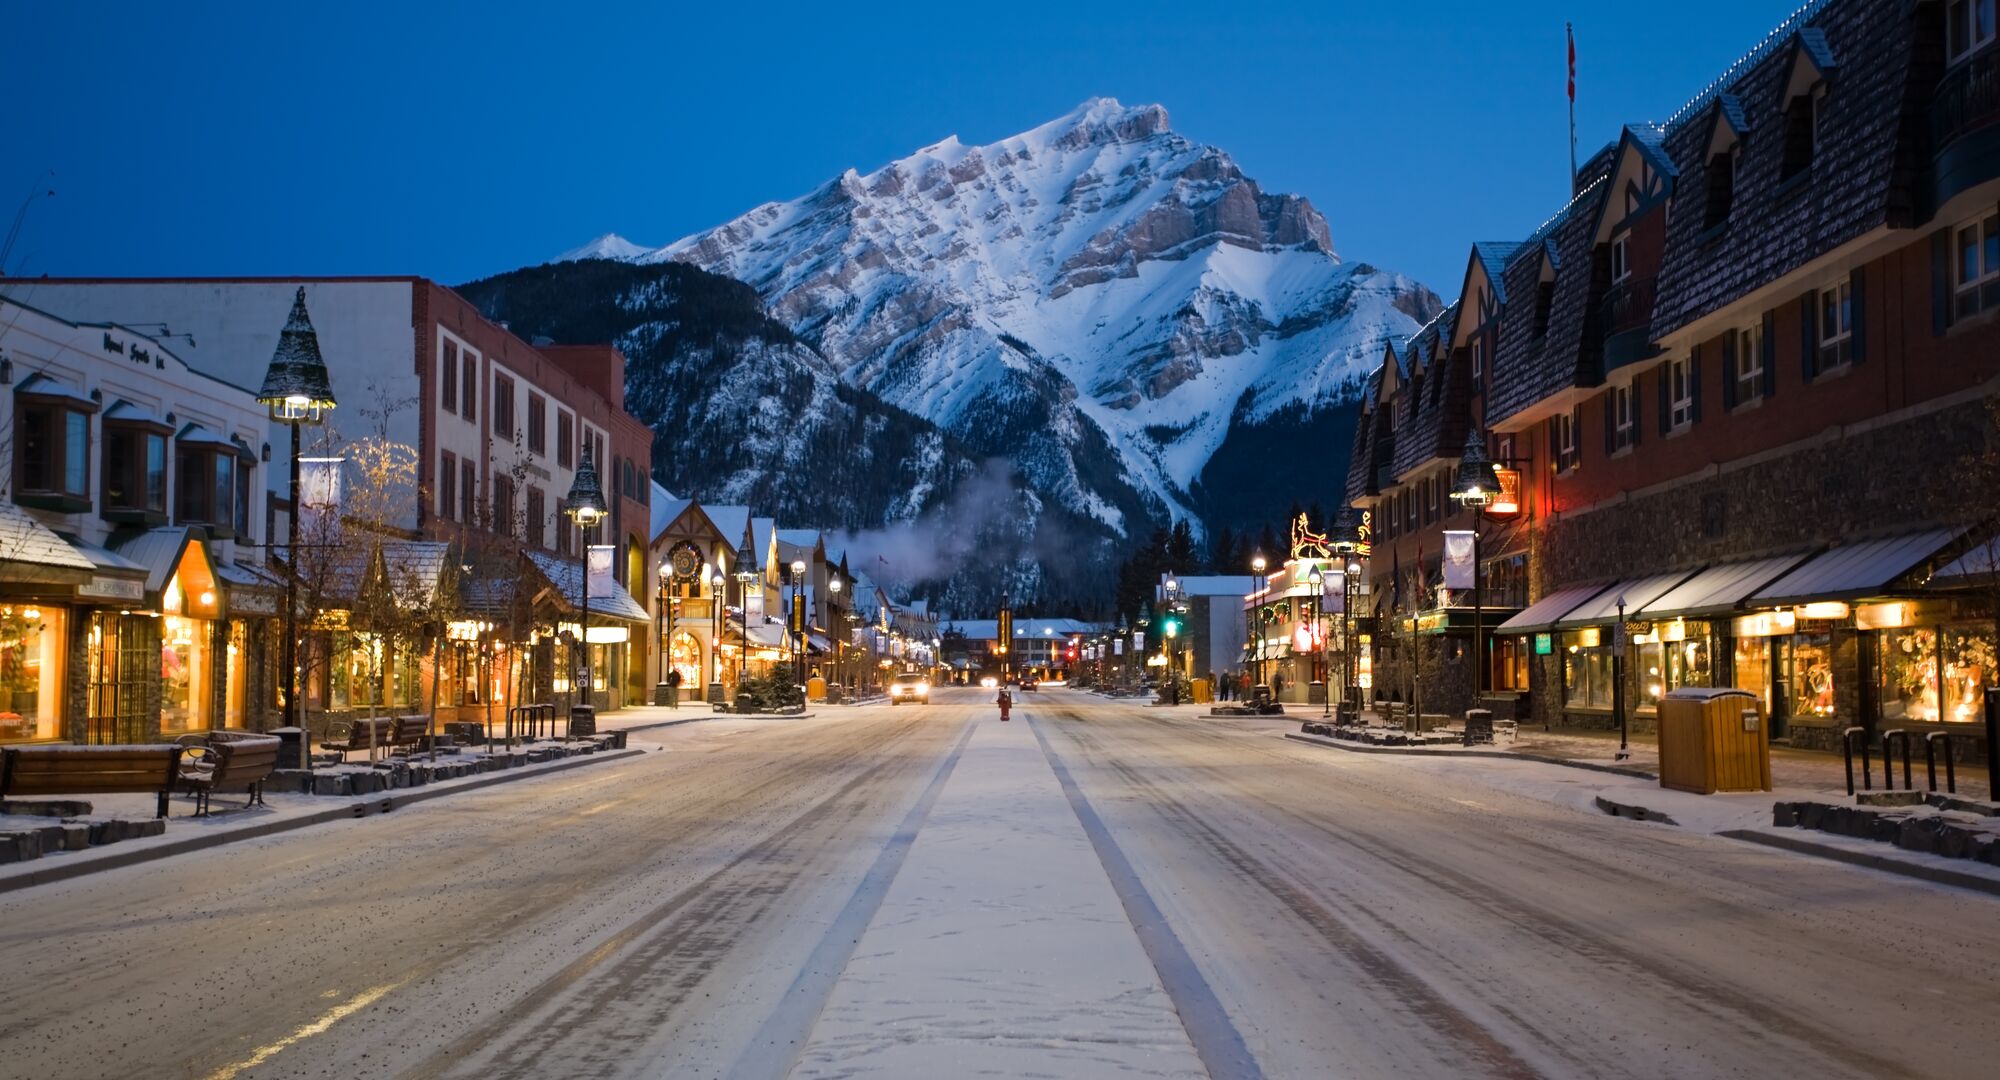 View looking down Banff Avenue in the winter with a snowy Cascade Mountain in the background